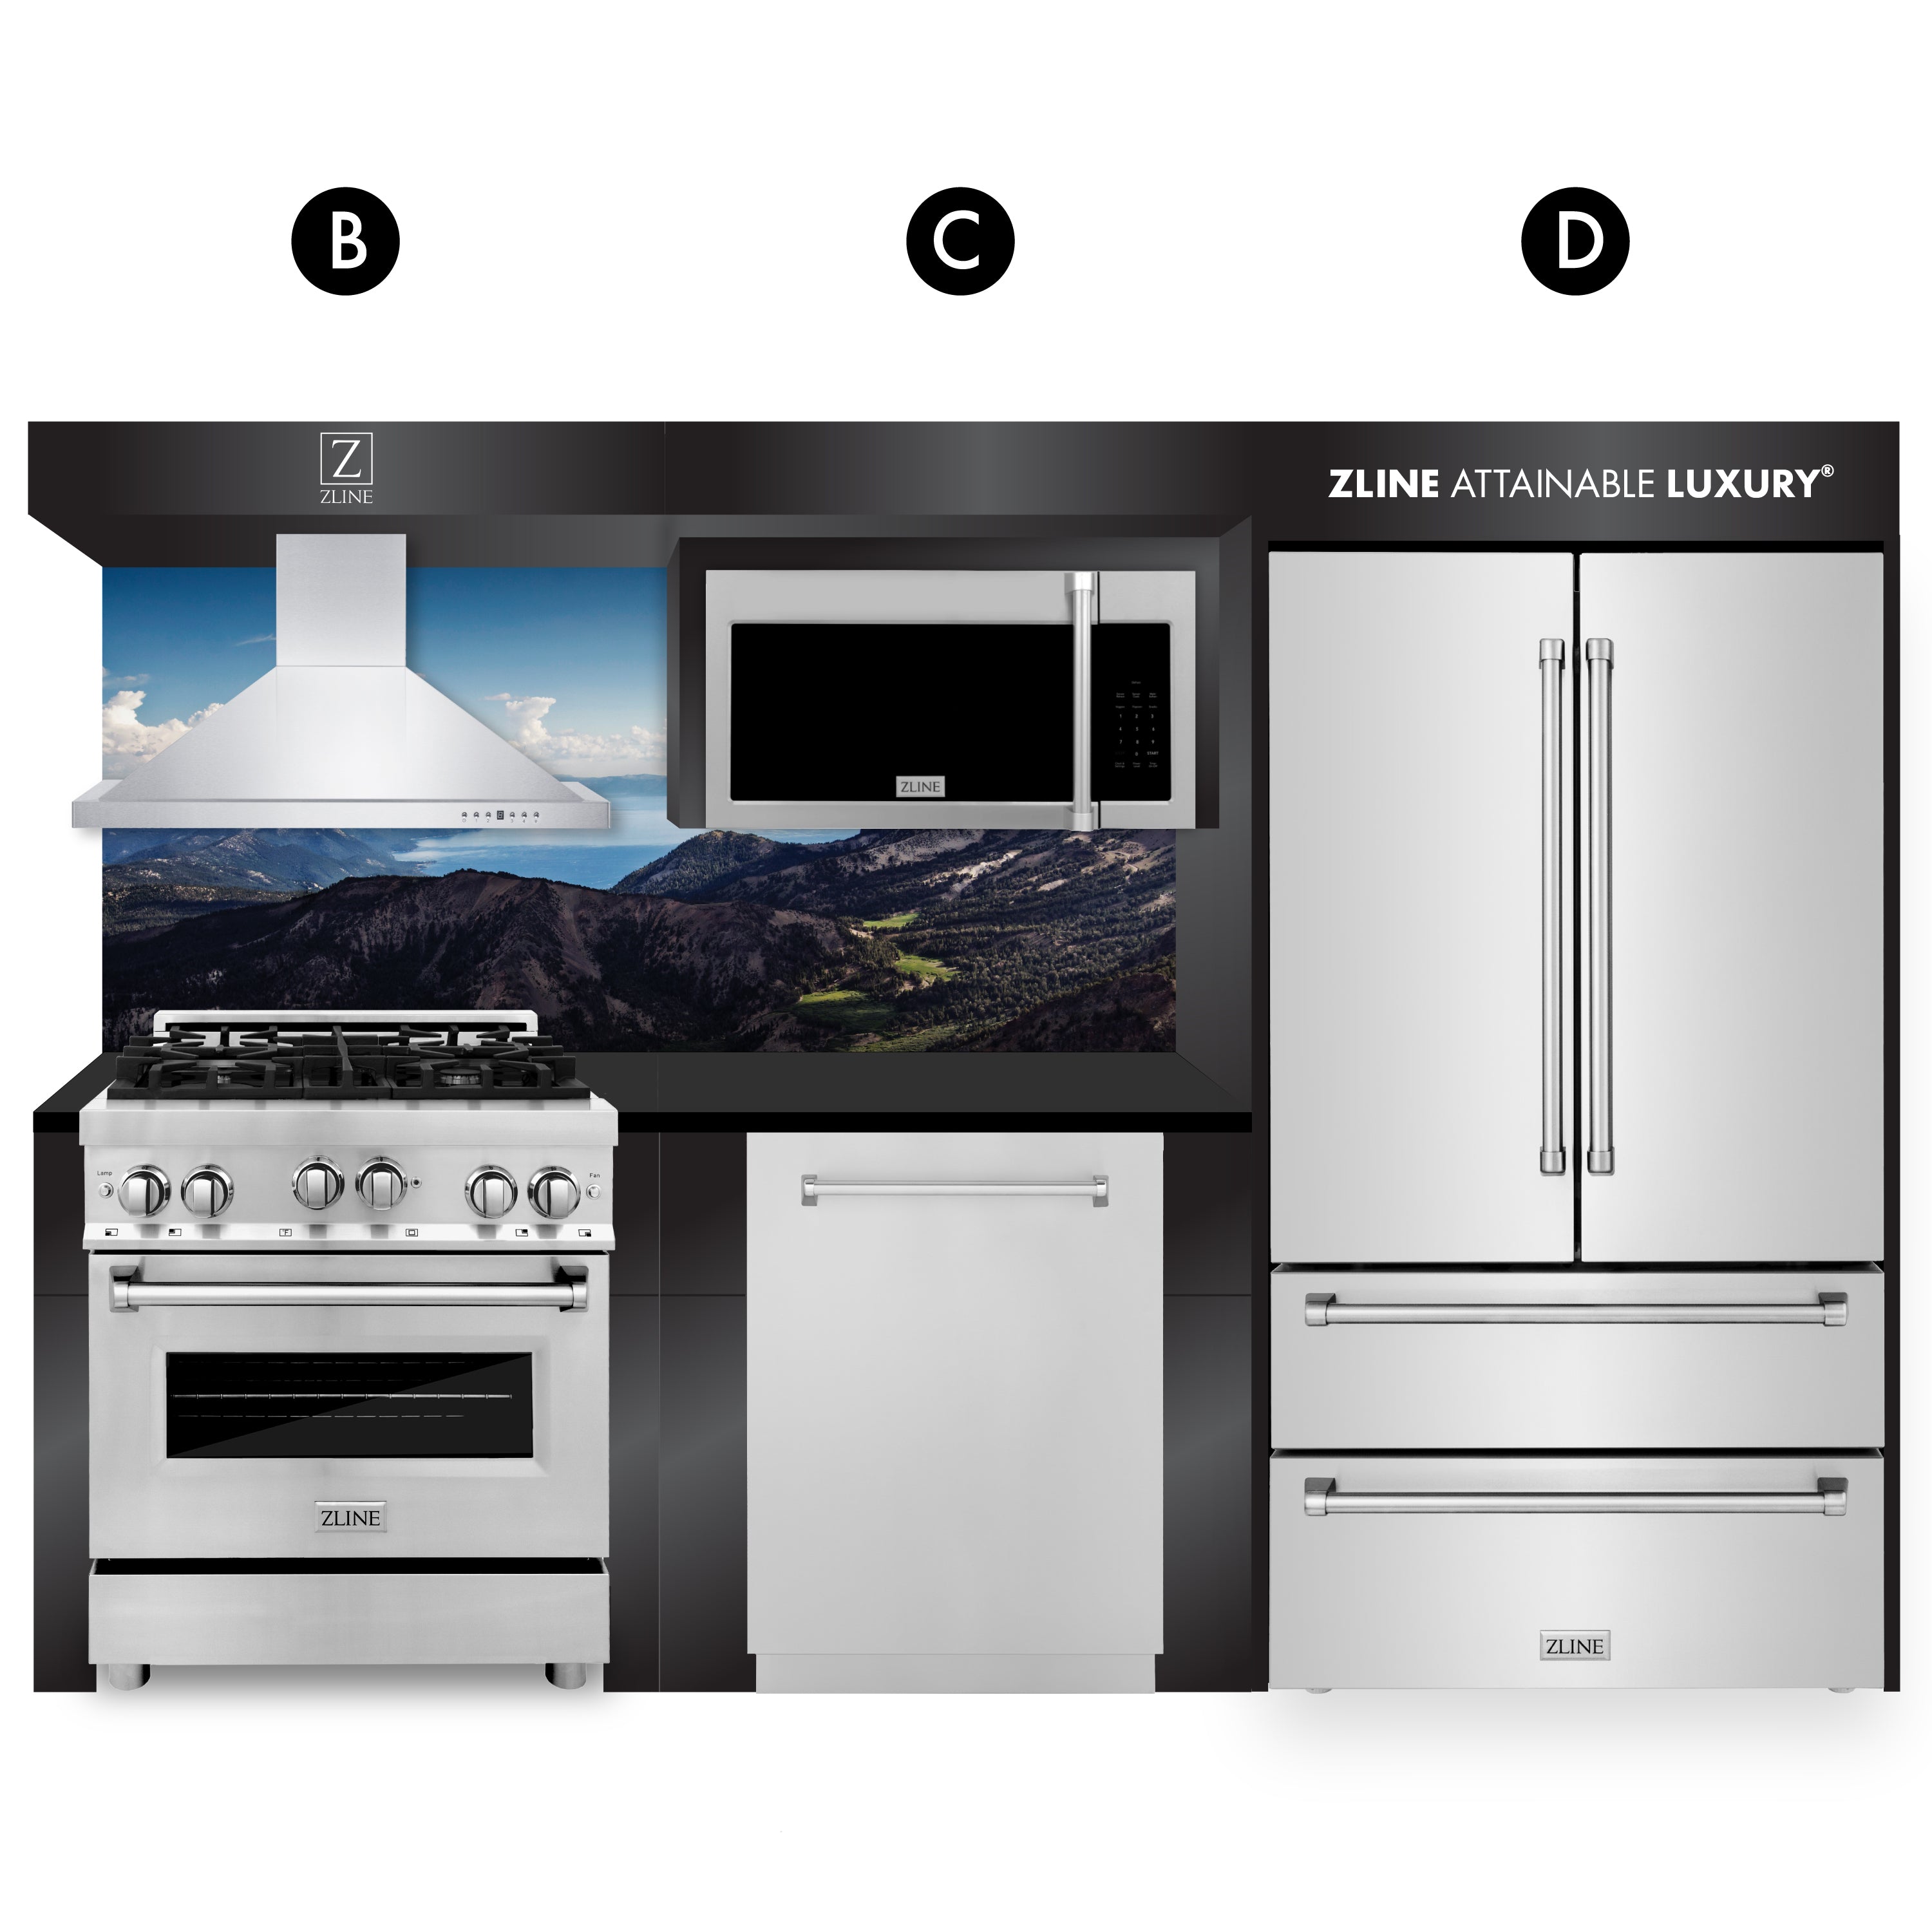 ZLINE Kitchen Vignette with a Stainless Steel Refrigerator, Gas Freestanding Range, Stainless Steel Range Hood, 30" Over the Range Microwave, and Monument Style Dishwasher (VND-BCD-RG)